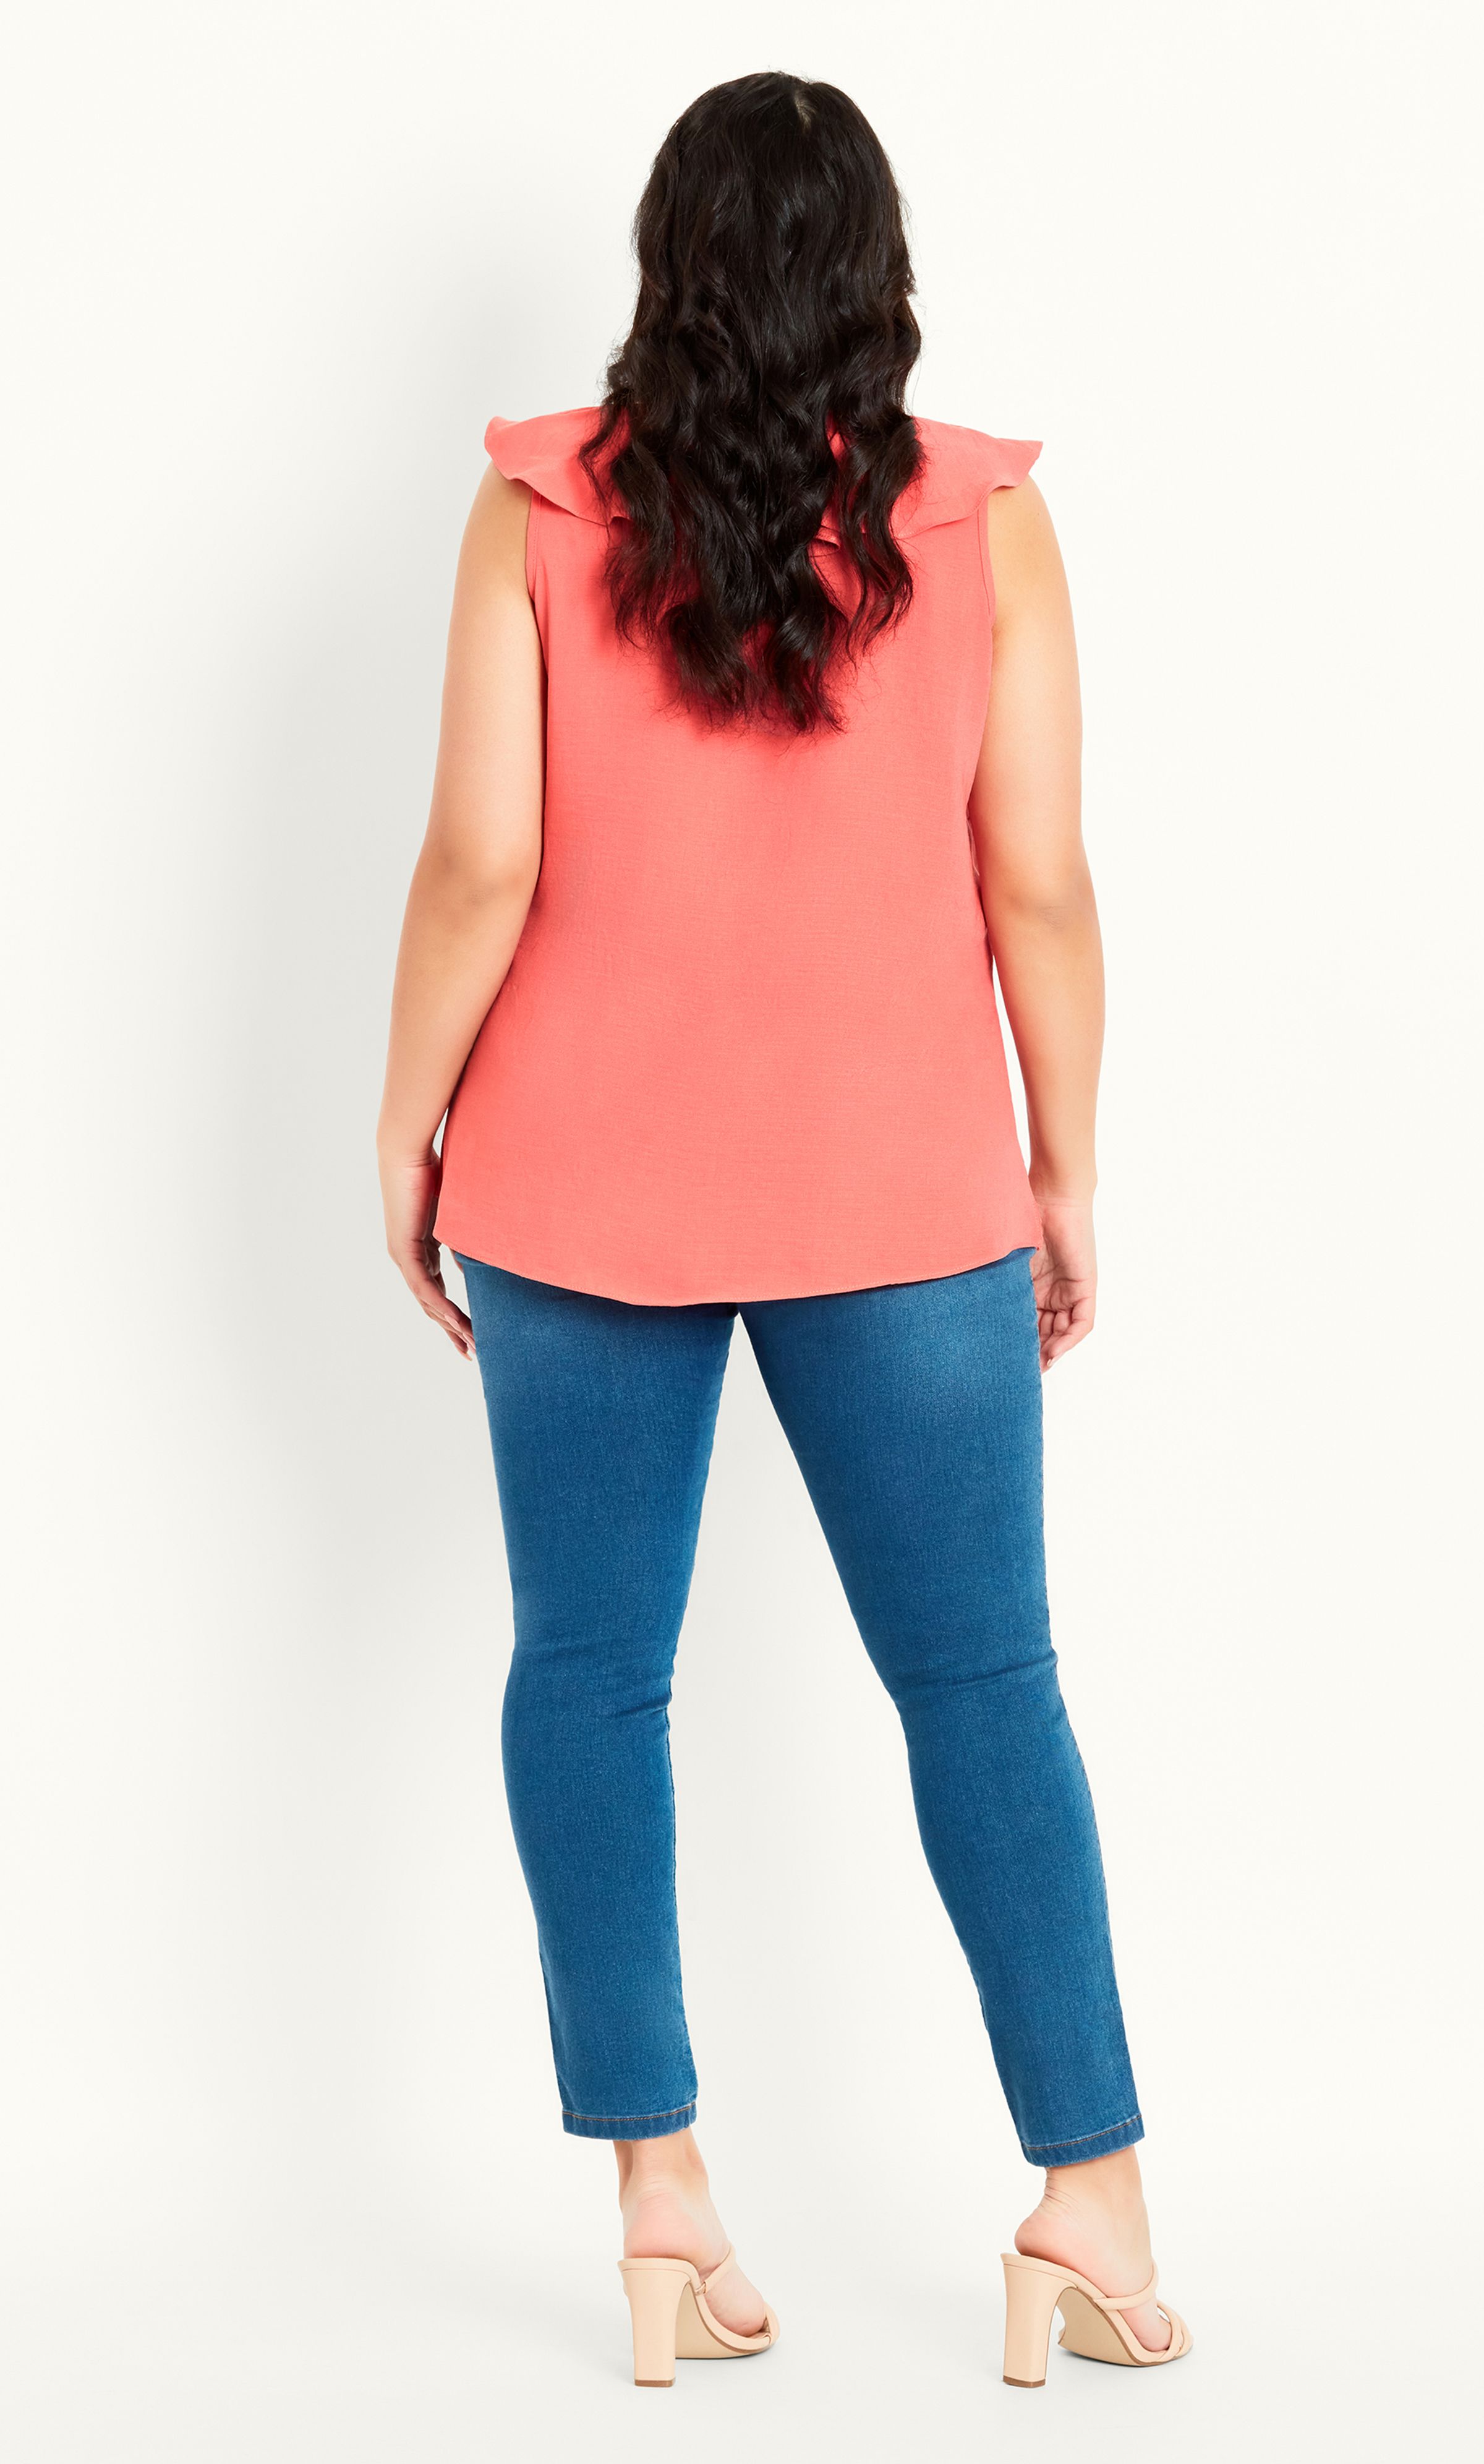 Looking to inject some colour to your wardrobe? Our Frill Vest is a timeless and versatile choice, offering a chic coral hue that'll breathe life into your casual outfit. Complete with a feminine frilled neckline, you'll be reaching for this sleeveless top on repeat! Key Features Include: - V-neckline with frill trim - Darted bust for shape - Relaxed fit - Pull over design - Woven non-stretch fabrication Tuck this top into a denim mini skirt, finishing with espadrille sandals and tortoise shell sunglasses for a cute summer outfit.